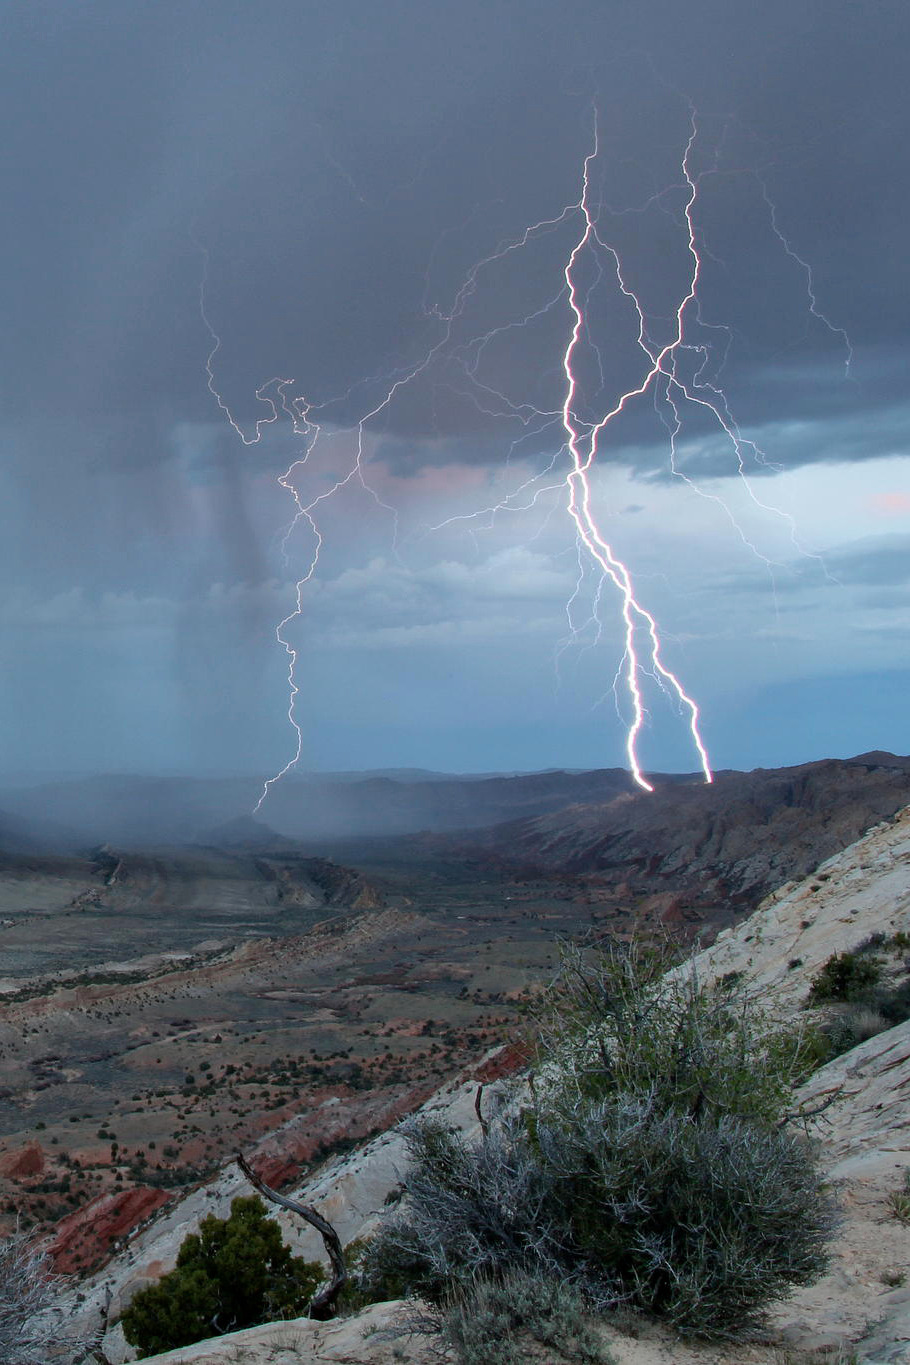 expressions-of-nature:Strike! / Capitol Reef National Park, Utah U.S.by: Christian